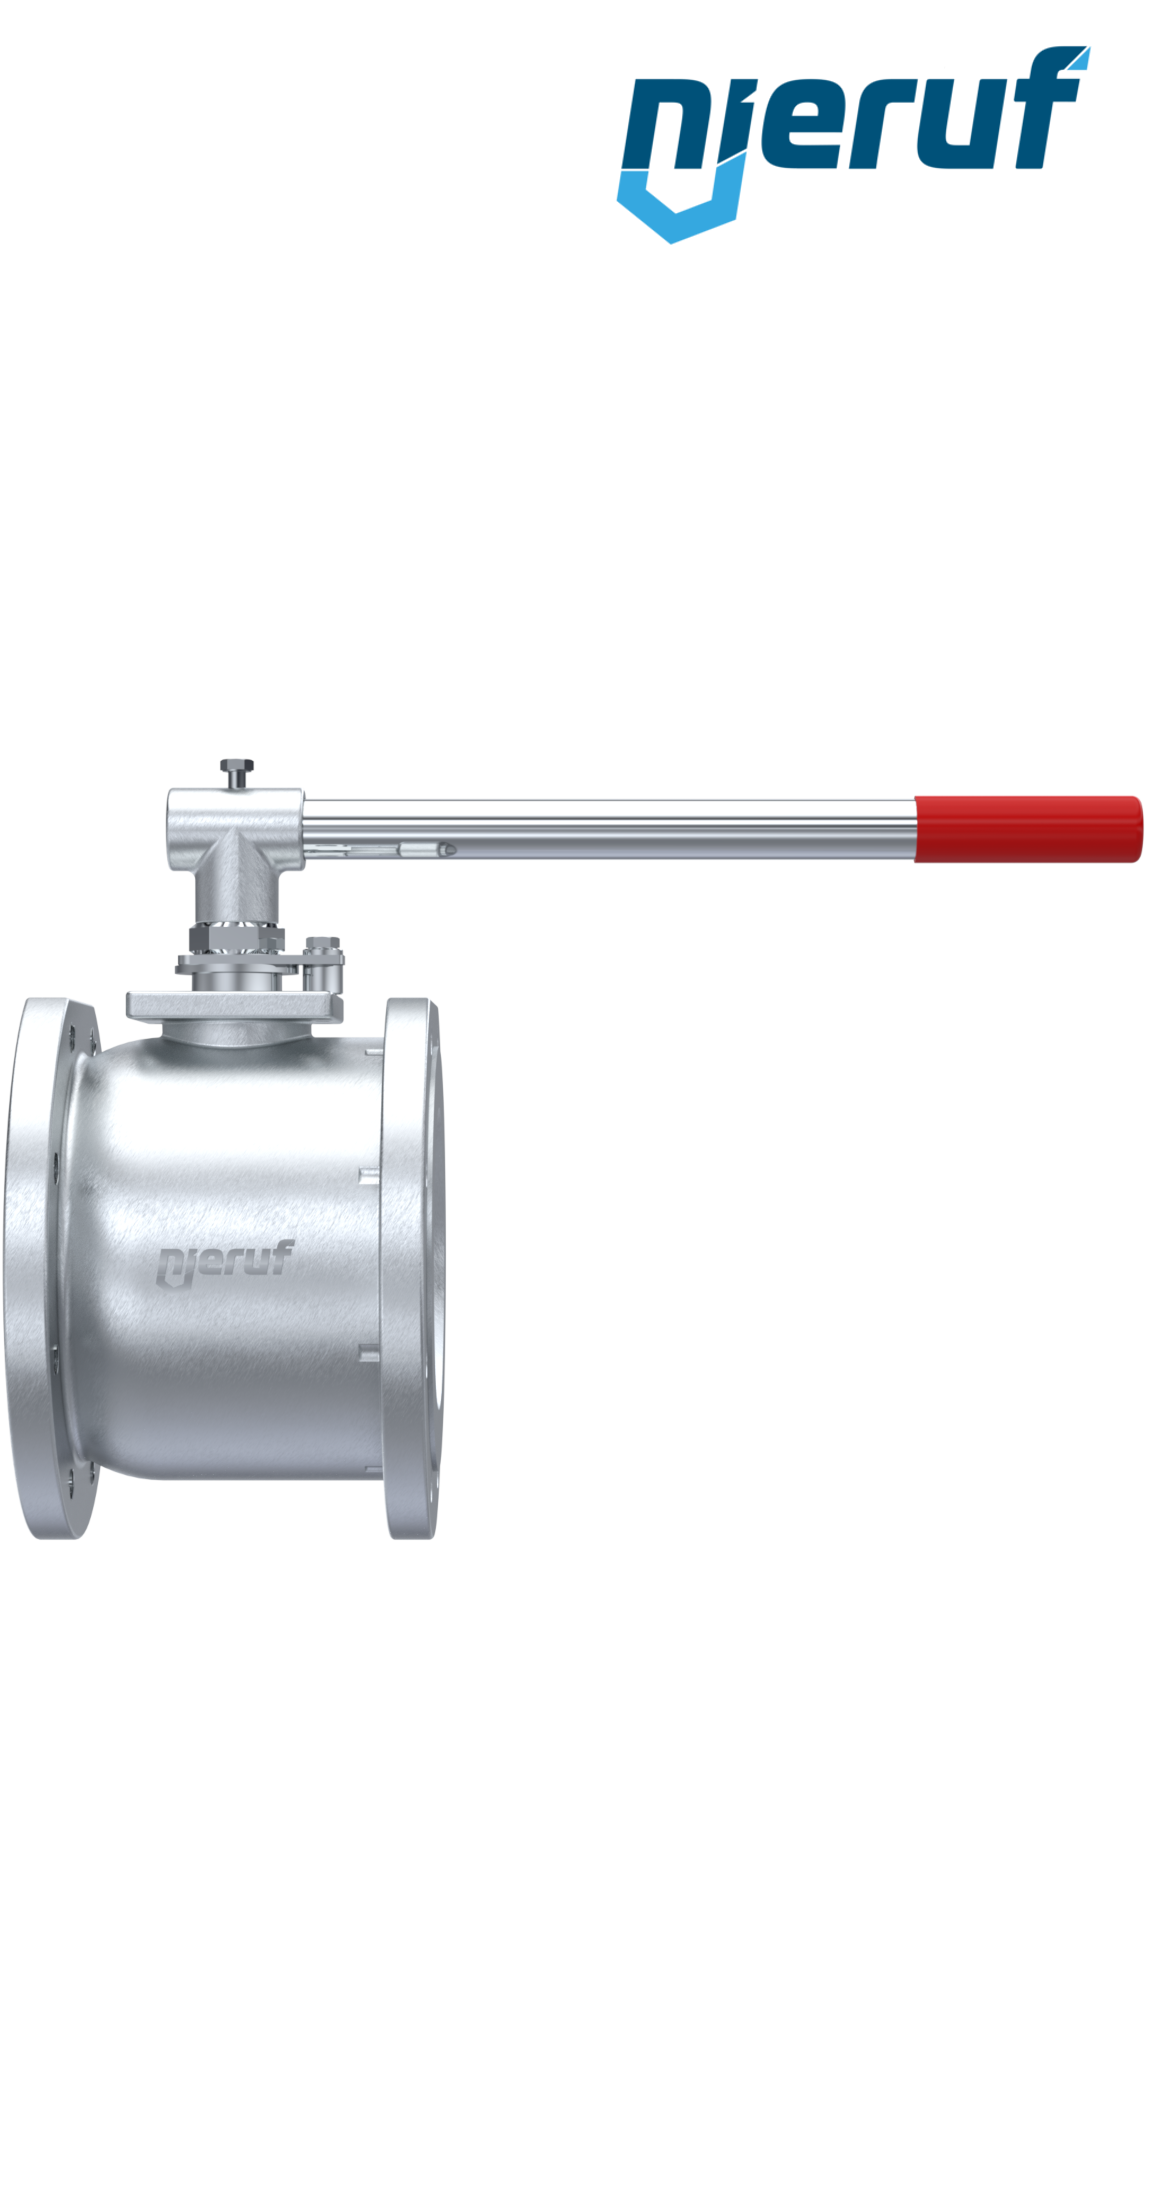 Compact ball valve stainless steel DN150 PN16 FK11